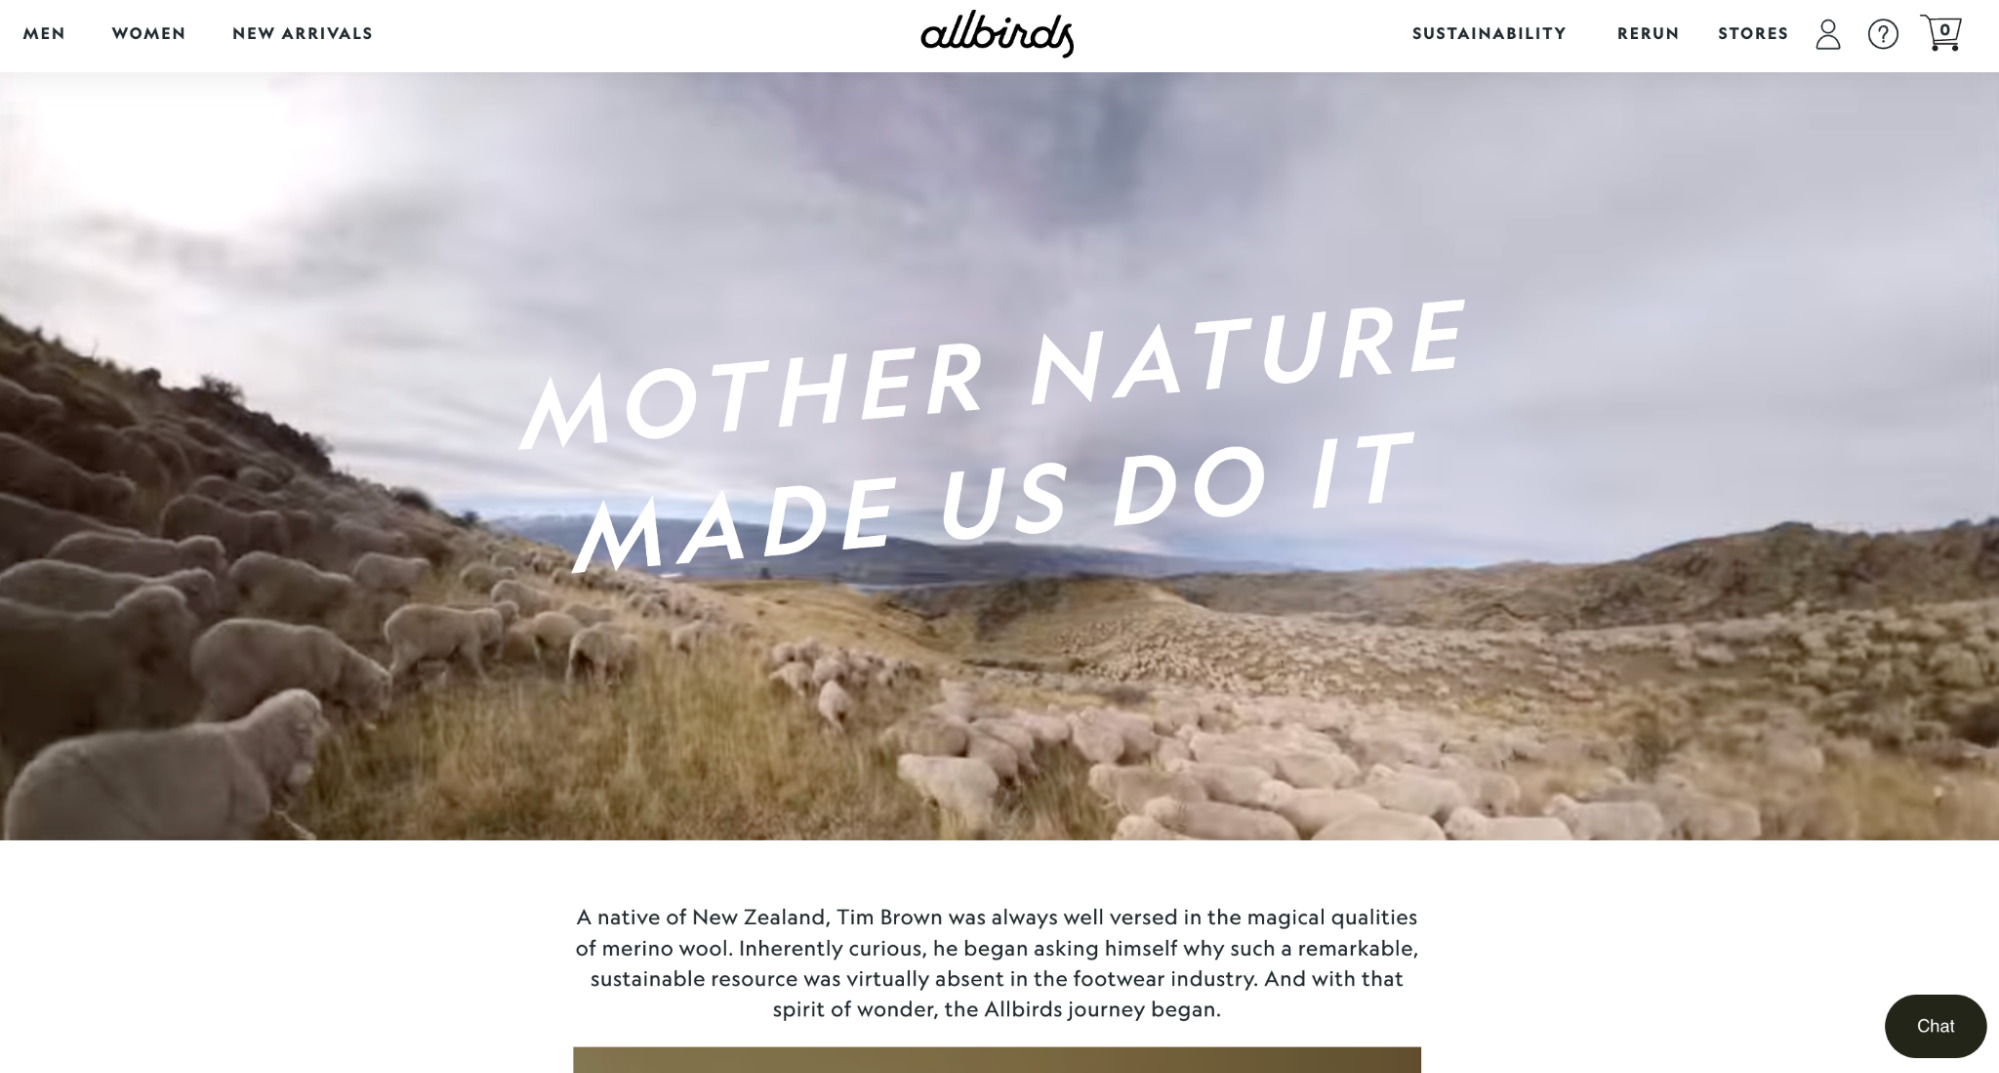 Screenshot of Allbirds About Us page featuring a hill filled with sheep